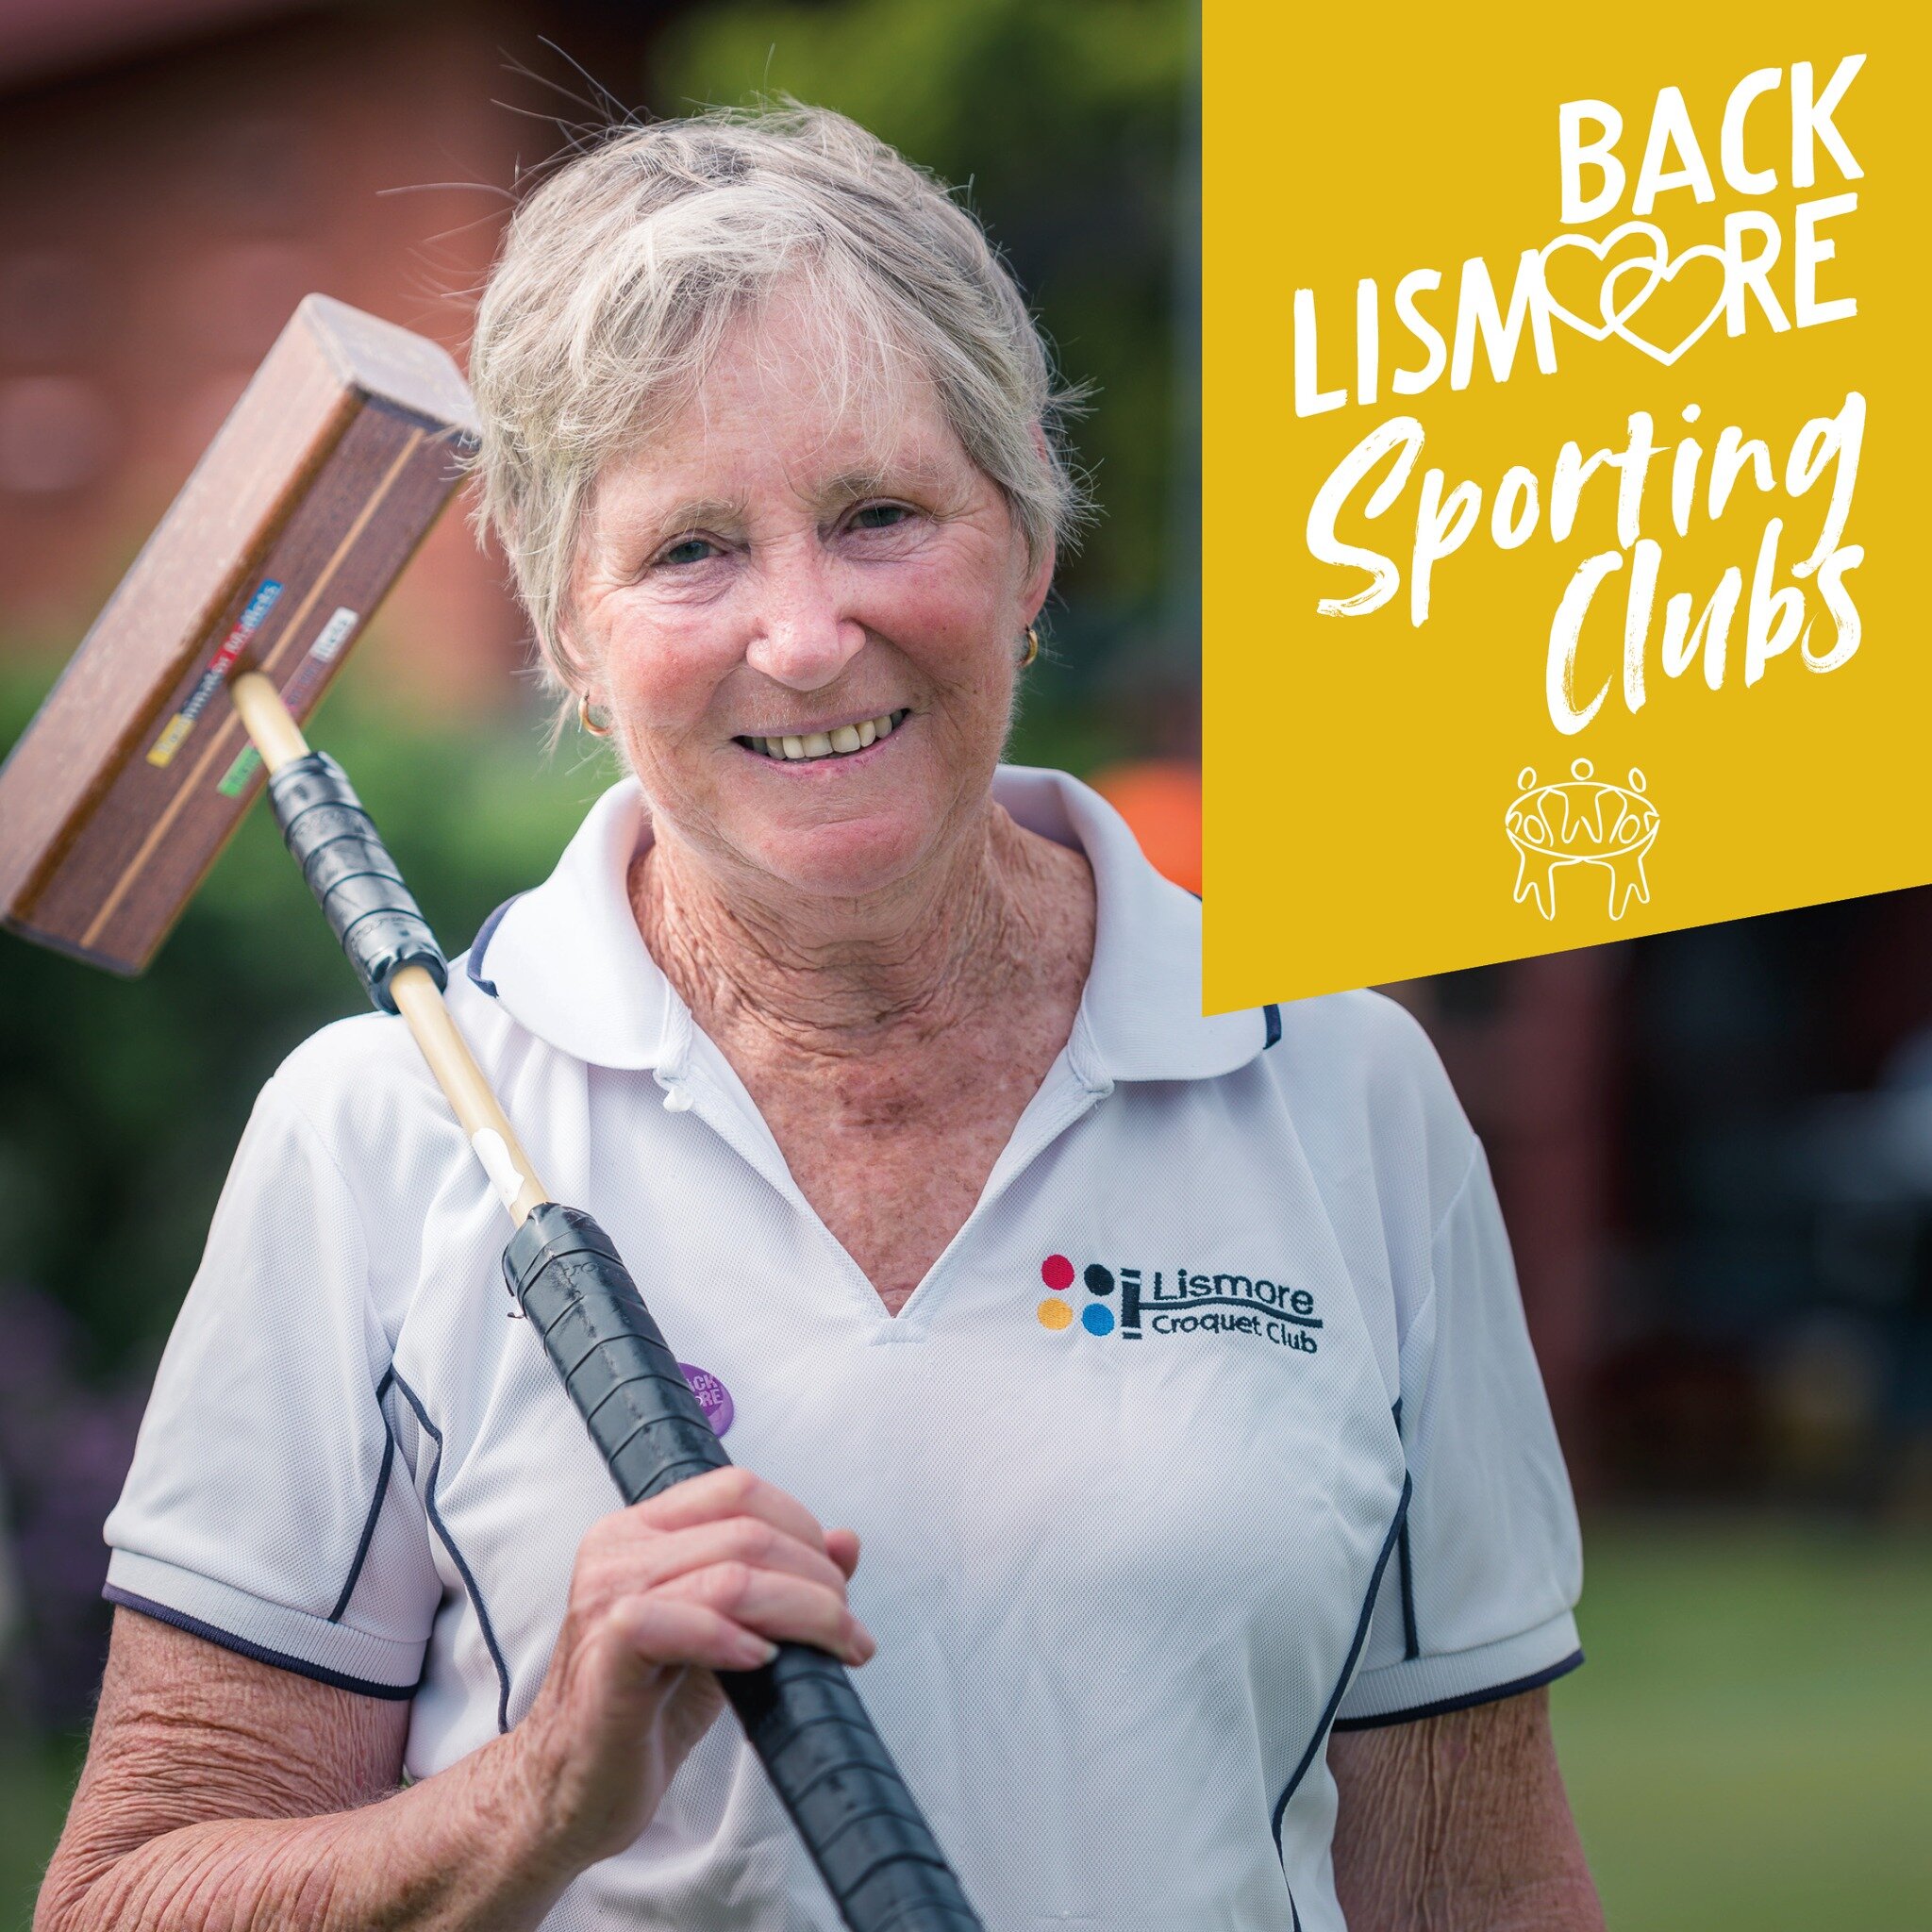 Meet Julie Spencer, the heart and soul of Lismore Croquet Club. As treasurer, Julie has been part of this incredible journey to rebuild after a devastating natural disaster. Starting with a humble port-a-loo, the unwavering support of Rebecca, Mick, 